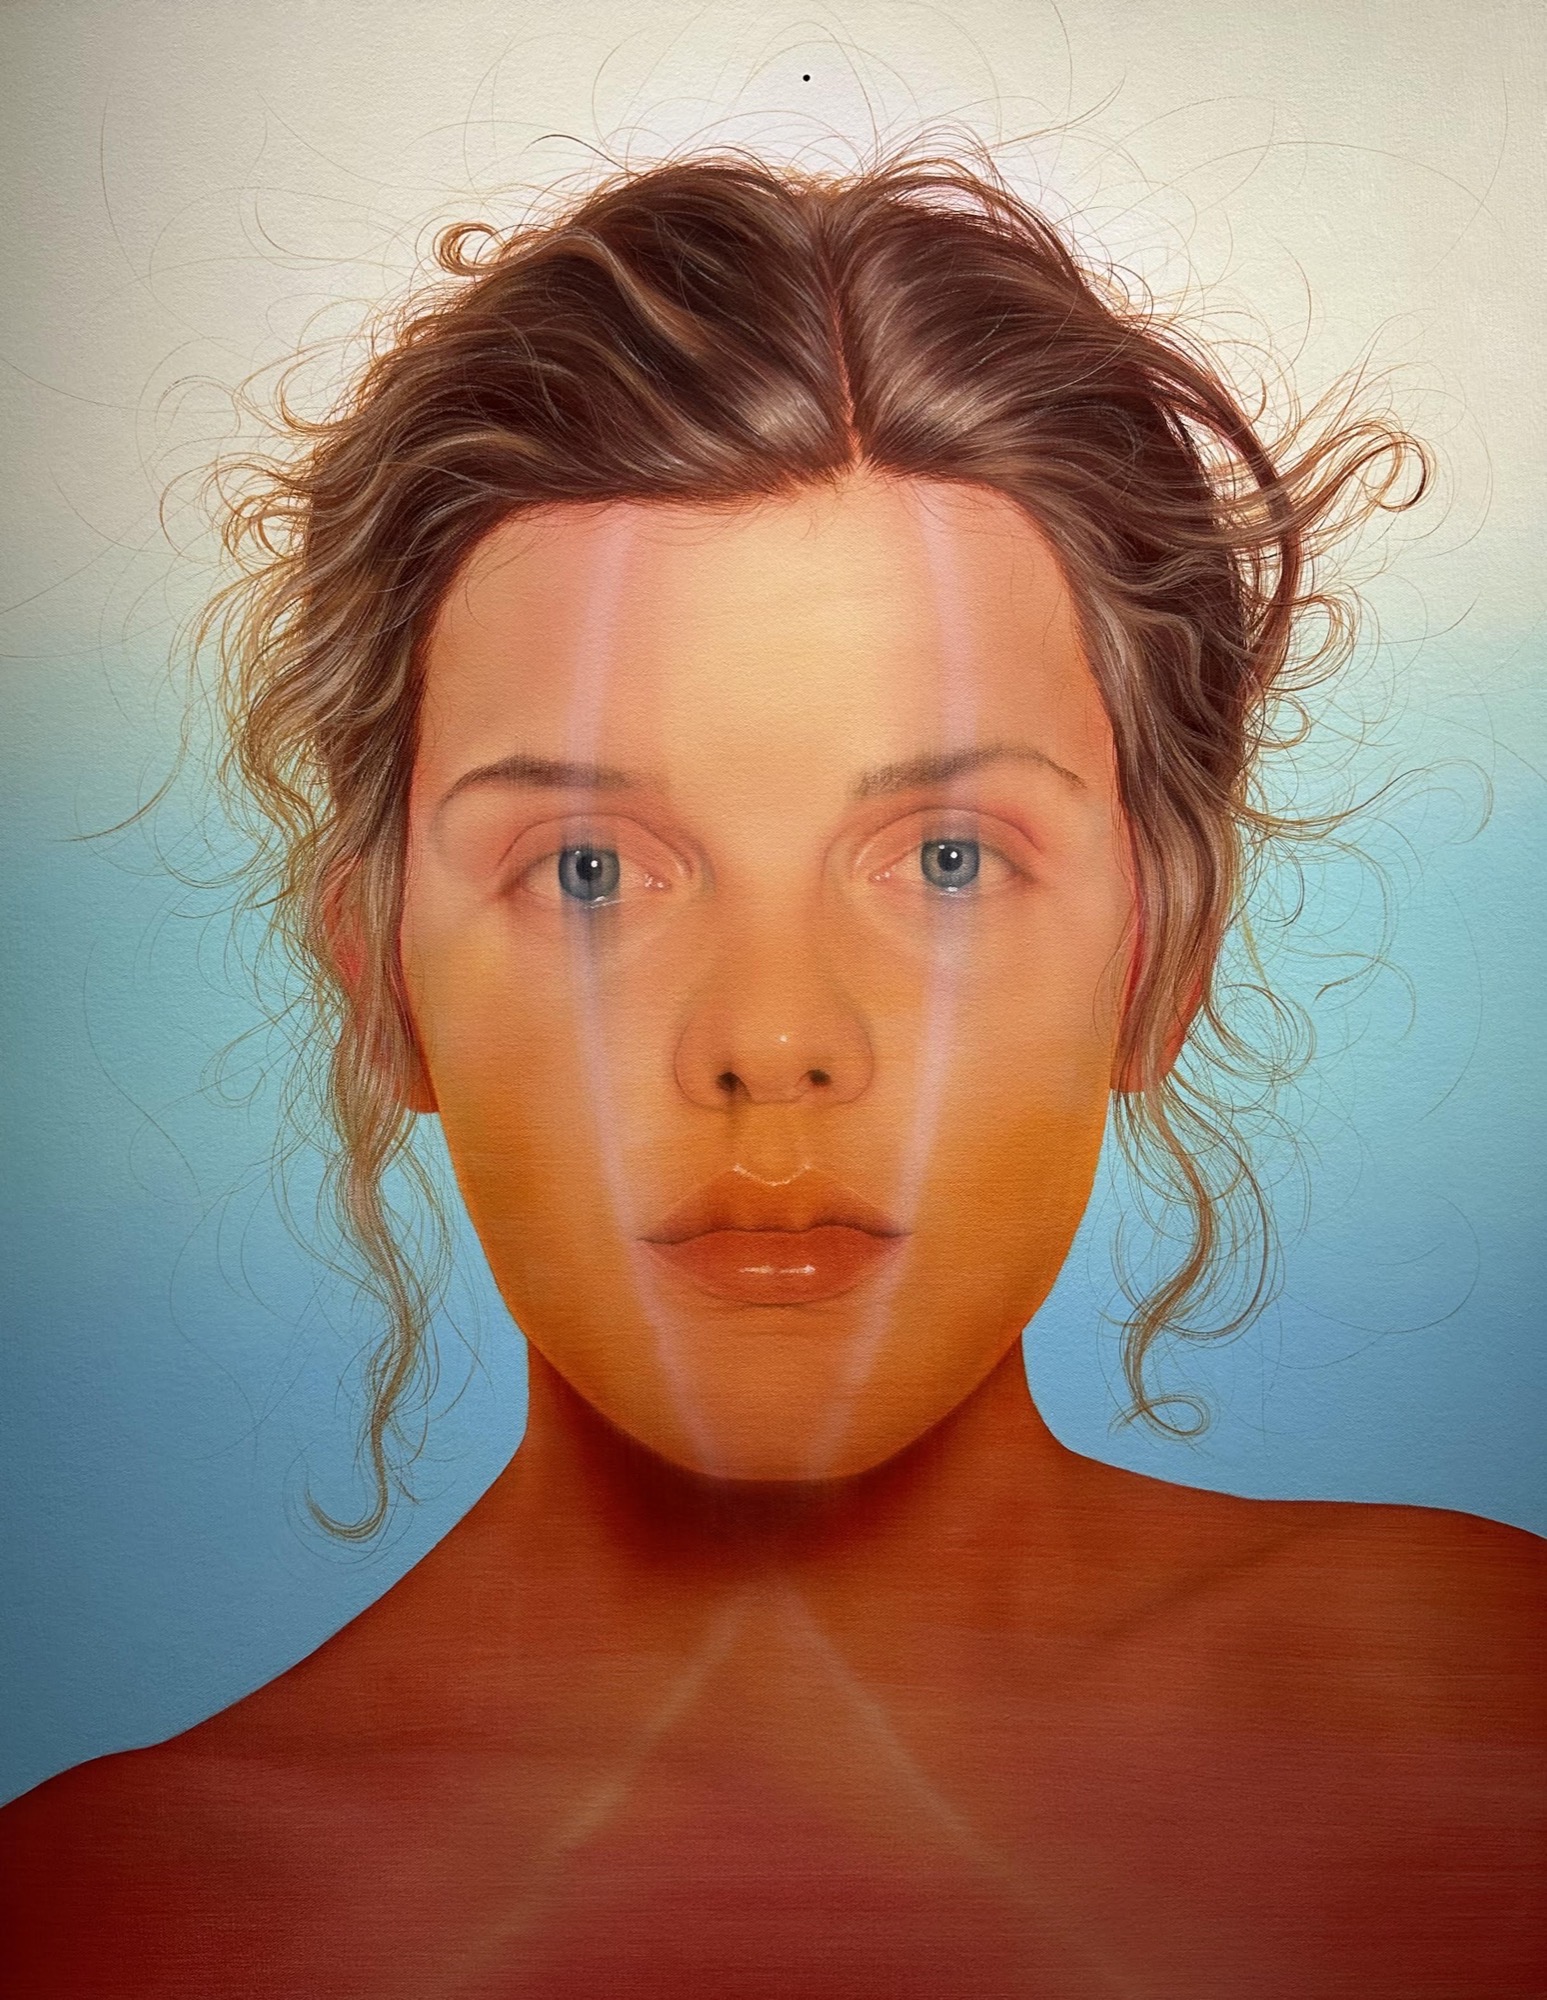 This painting depicts a portrait of woman slightly distorted by a blurry long x shape that extends from the nape of her neck through her eyes to her forehead. This hyperreal portrait features locks of curling light brown hair. The subject has bright blue piecing eyes.